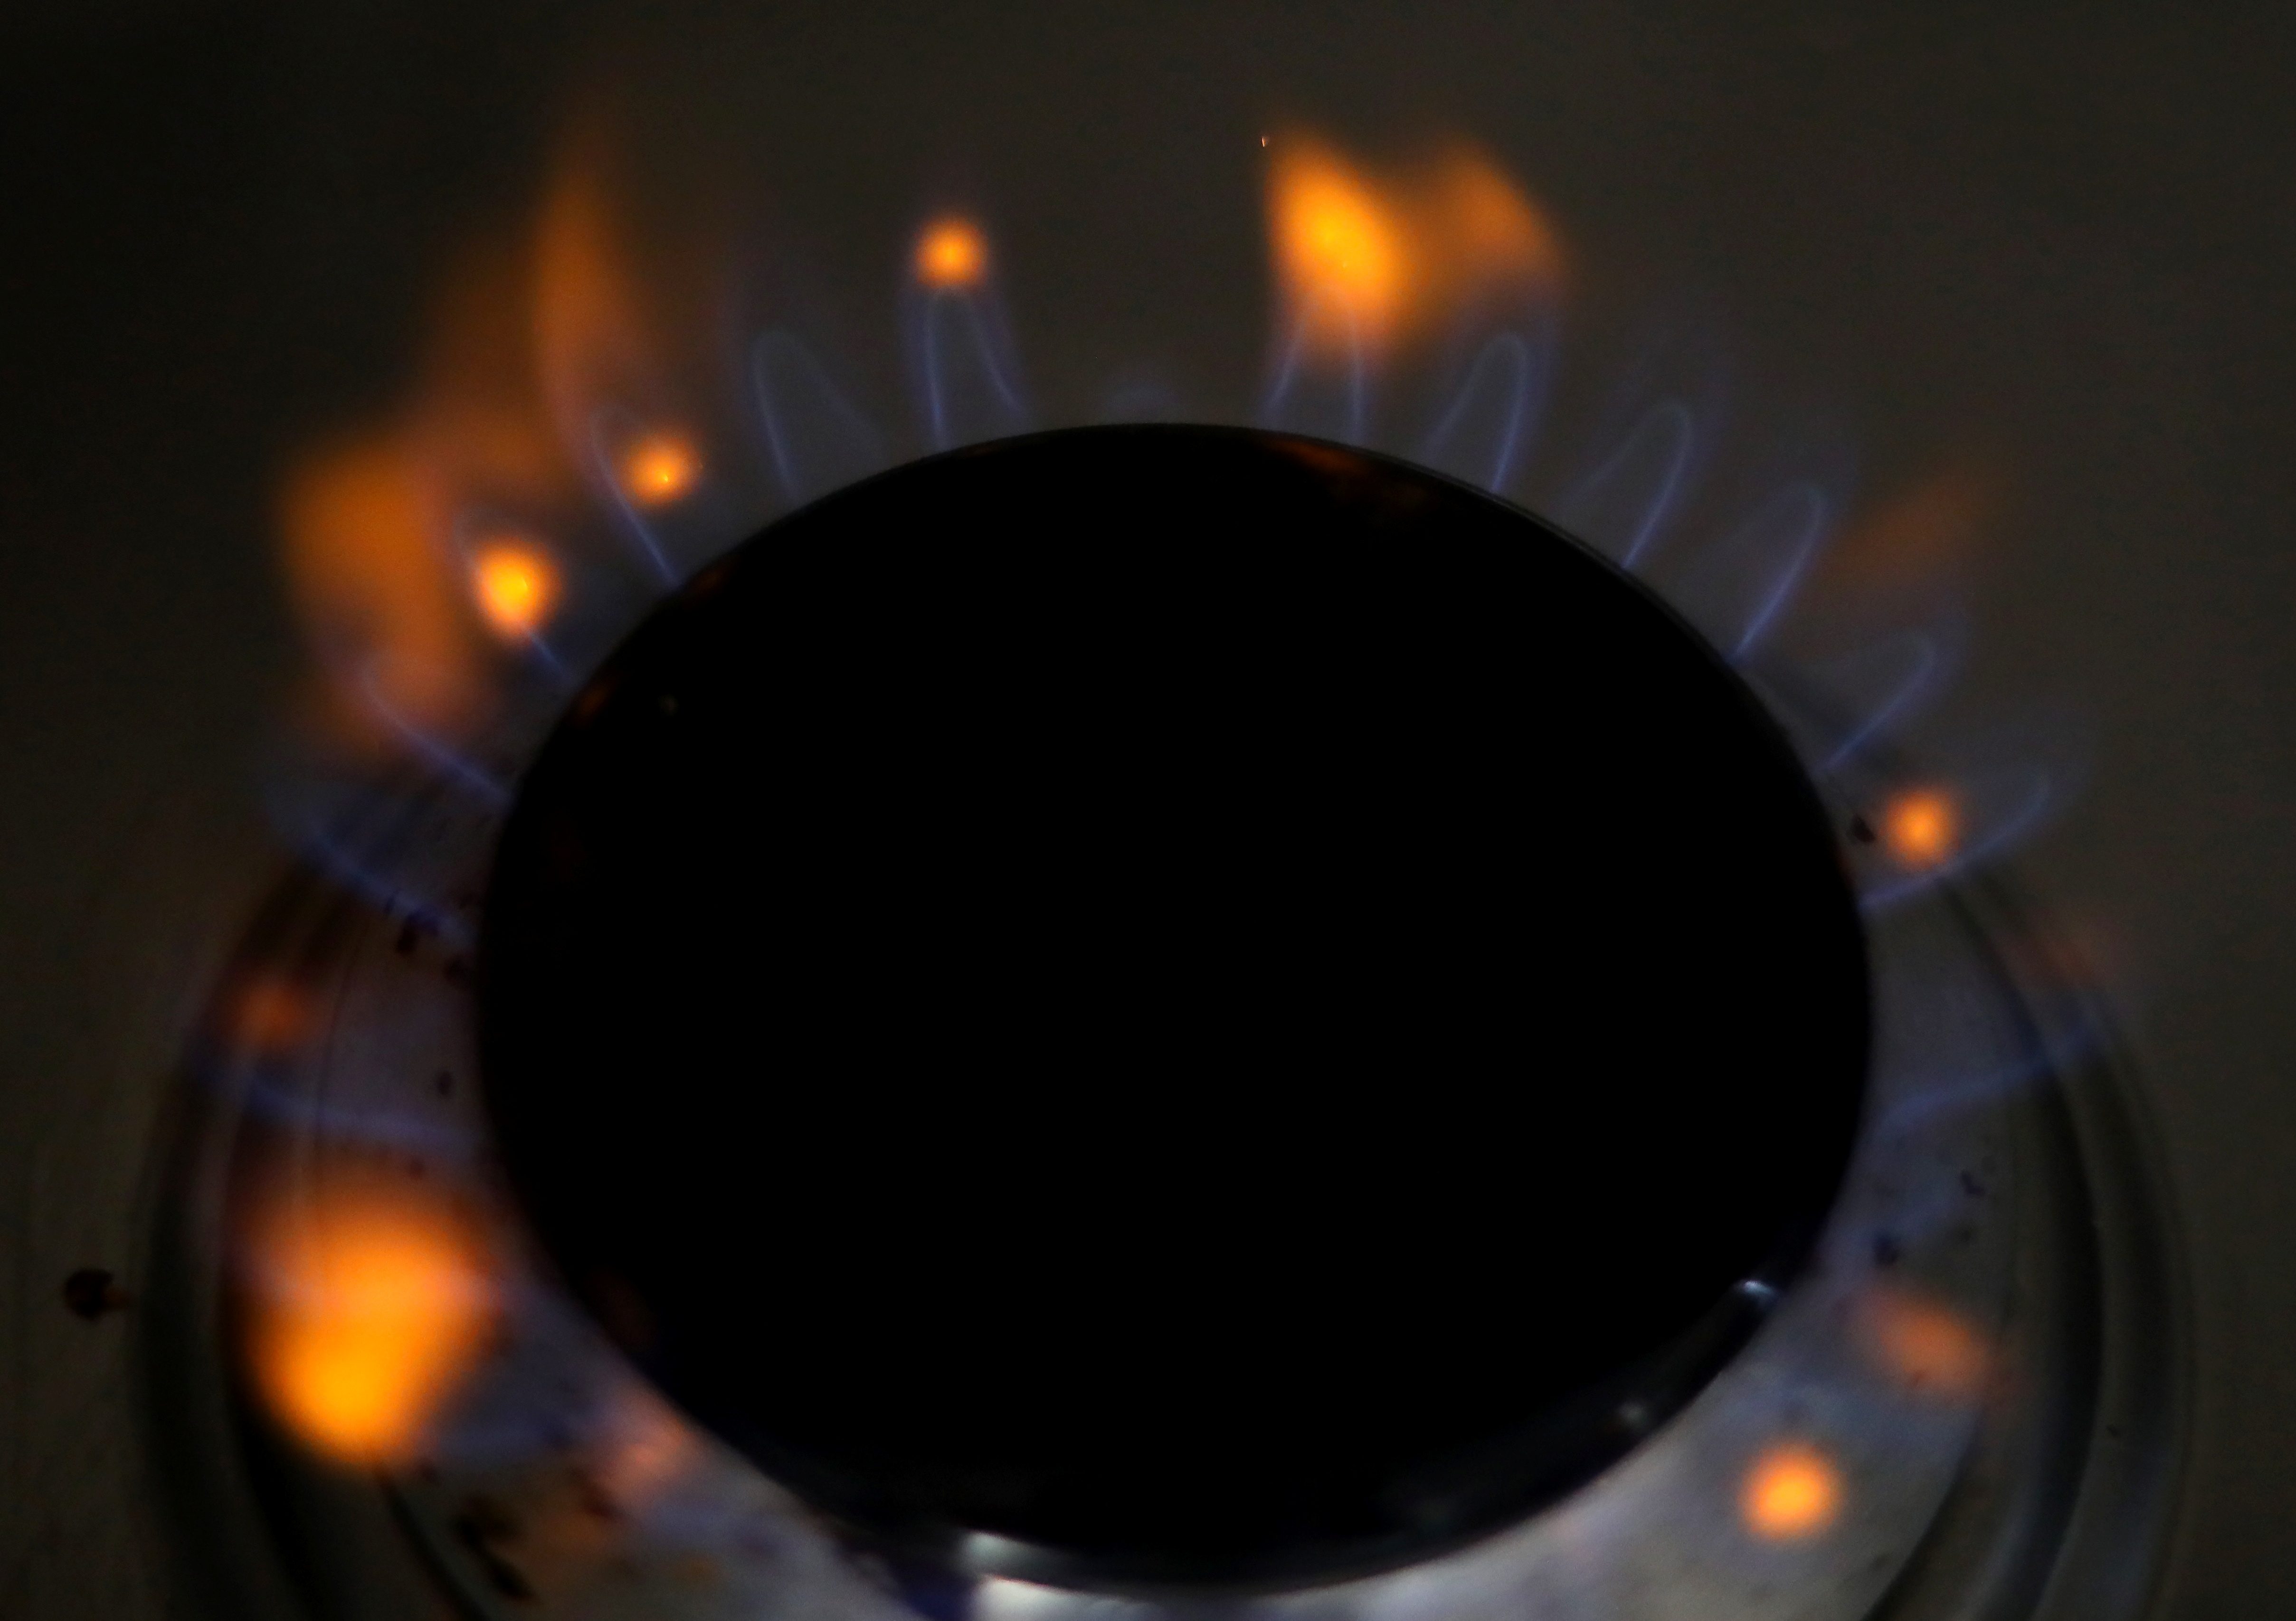 UK energy firms seek state support to weather gas crisis